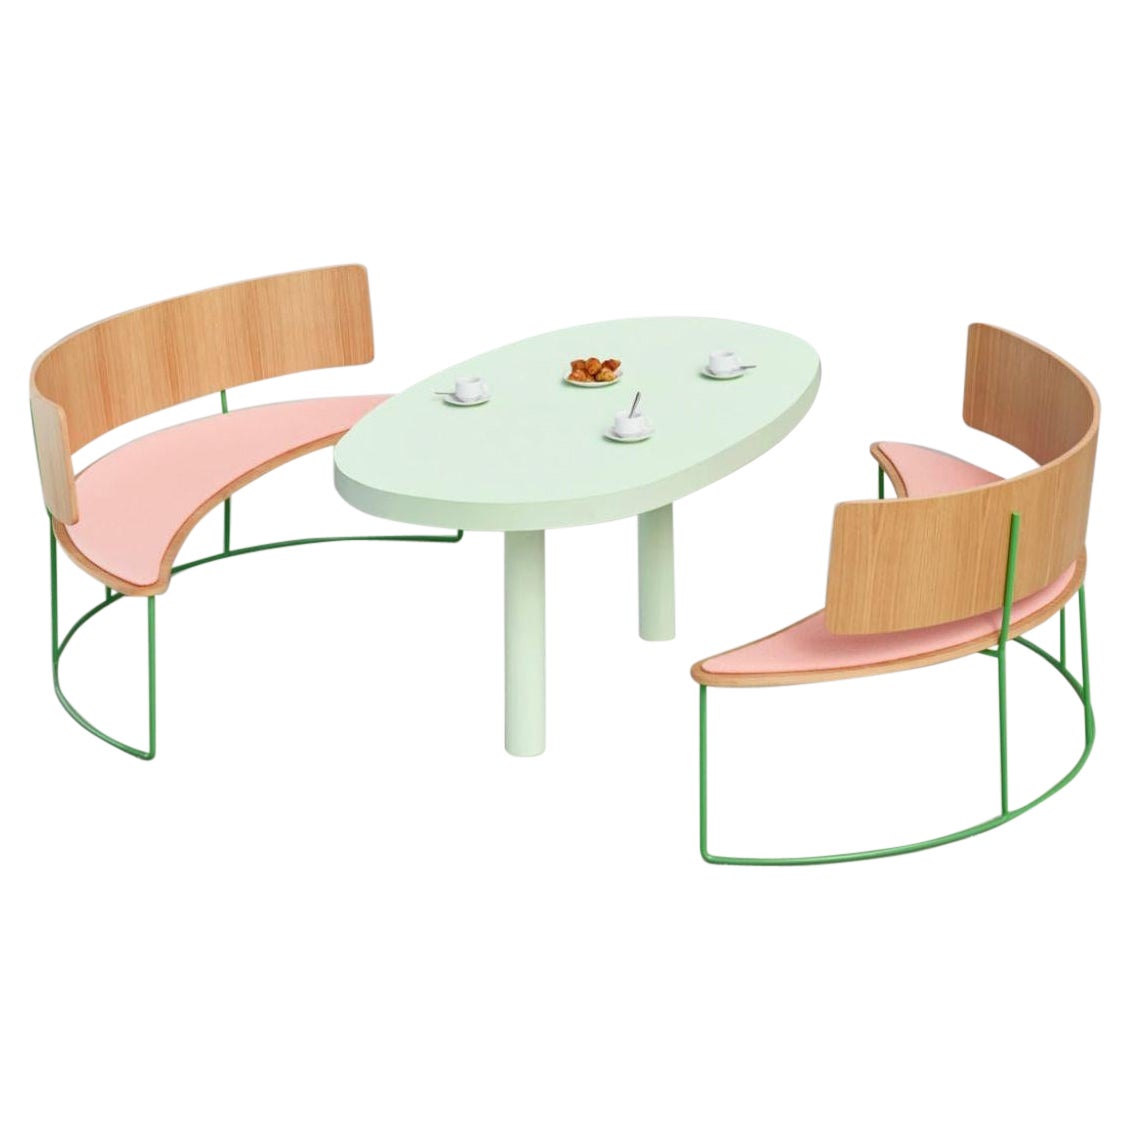 Set of 2 Boomerang Benches, Pink by Cardeoli